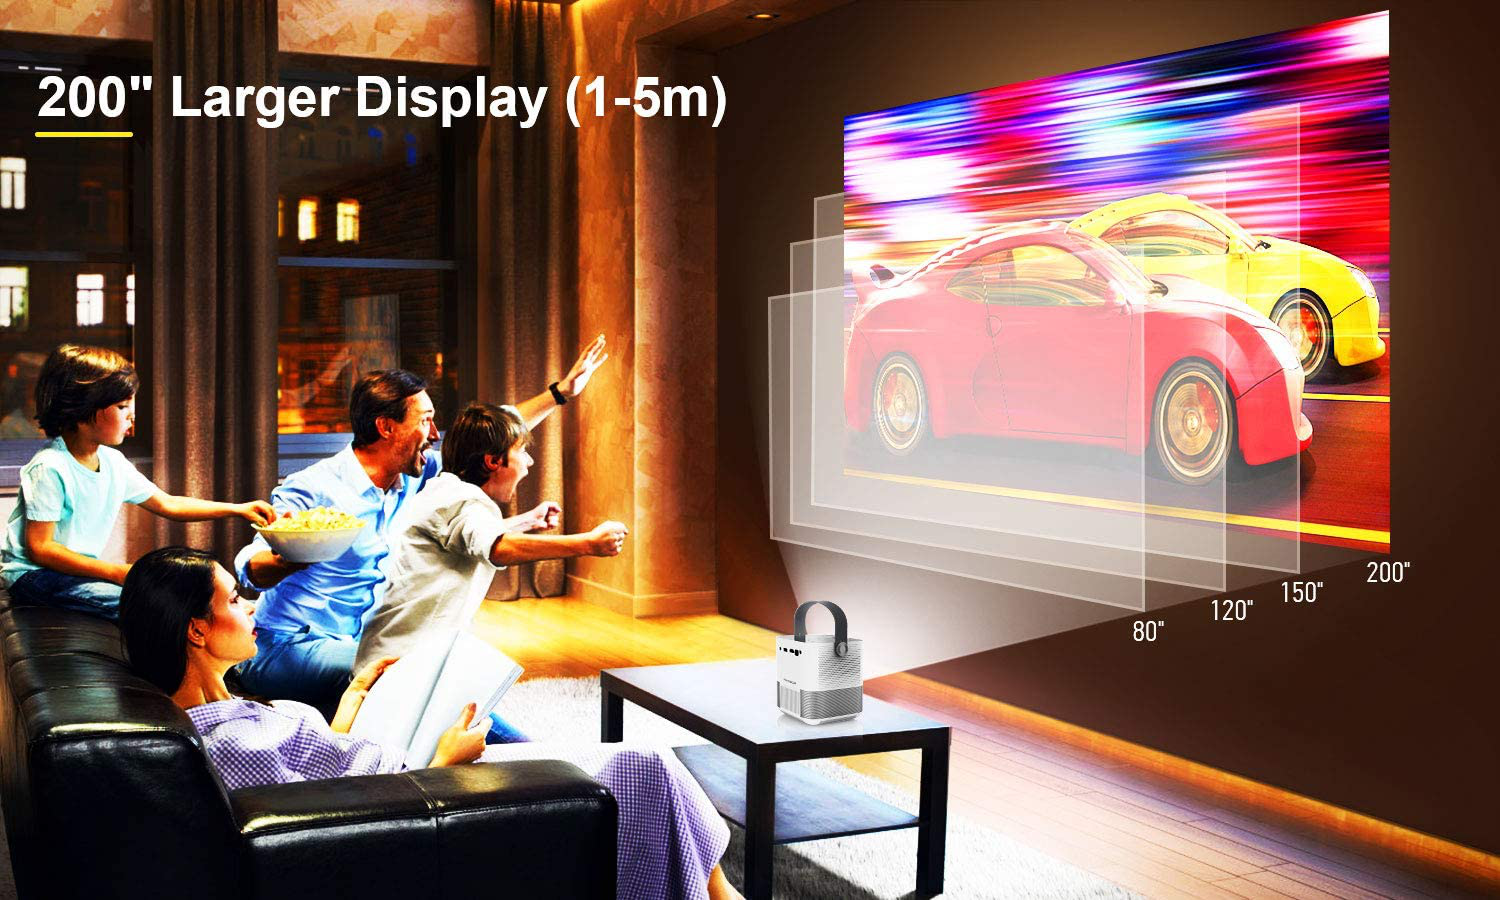 FANGOR Wifi Projector, 200" Display&1080P Supported, 360° Speaker/Bluetooth, 6000L Portable Wireless Mini Projector for Outdoor Movie, Sync Smartphone Screen via Wifi/Usb Cable, for Ios/Android